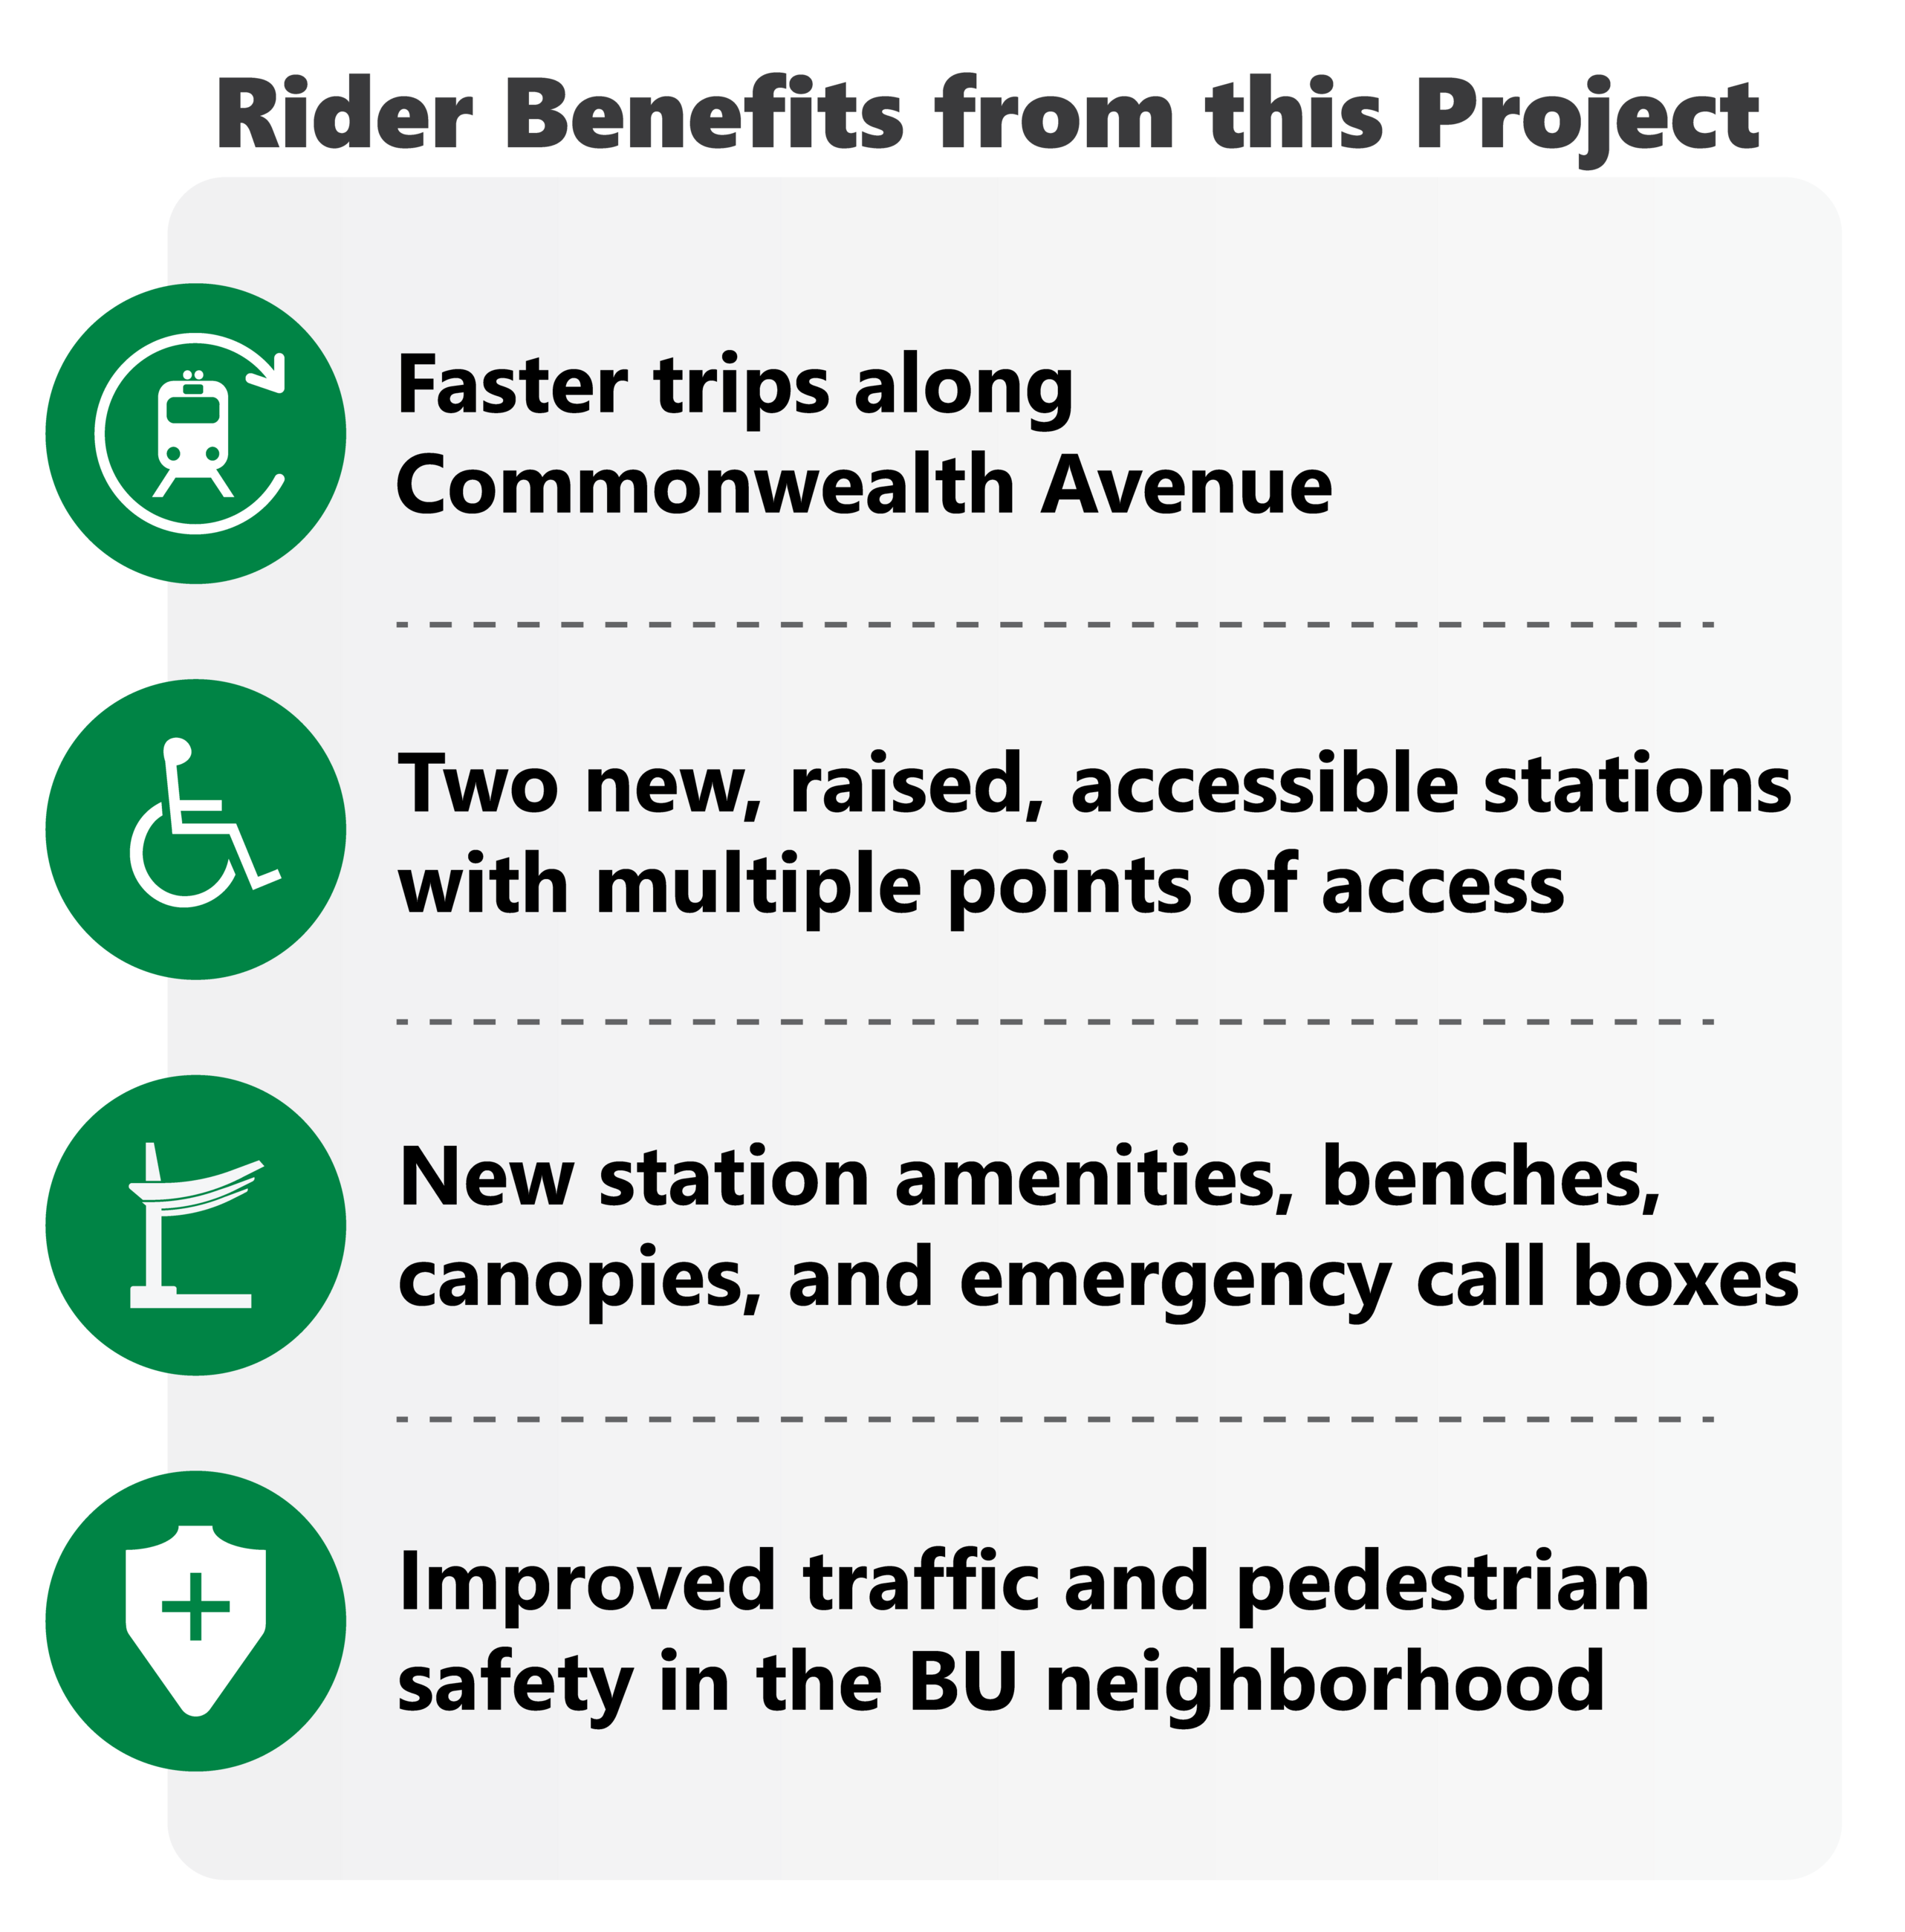 B Branch Station Consolidation project benefits include faster trips along Commonwealth Avenue, two brand new and accessible stations, new station amenities, and improved traffic and pedestrian safety near Boston University.